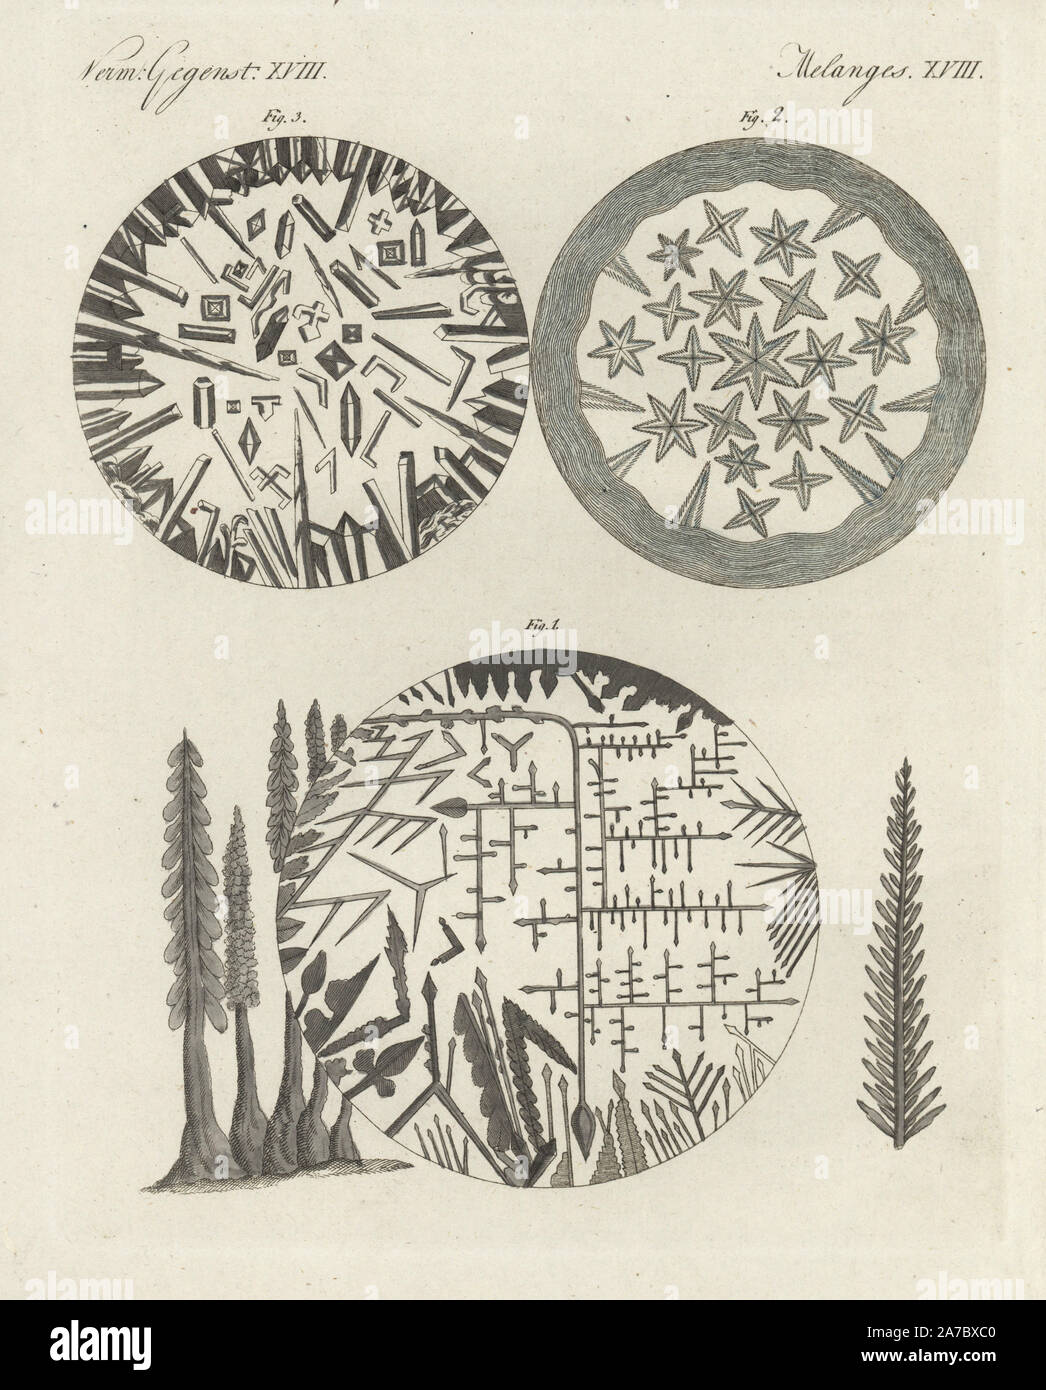 Crystals magnified under a microscope: silver solution and Diana's tree 1, camphor 2, and niter 3. Handcoloured copperplate engraving from Bertuch's 'Bilderbuch fur Kinder' (Picture Book for Children), Weimar, 1798. Friedrich Johann Bertuch (1747-1822) was a German publisher and man of arts most famous for his 12-volume encyclopedia for children illustrated with 1,200 engraved plates on natural history, science, costume, mythology, etc., published from 1790-1830. Stock Photo